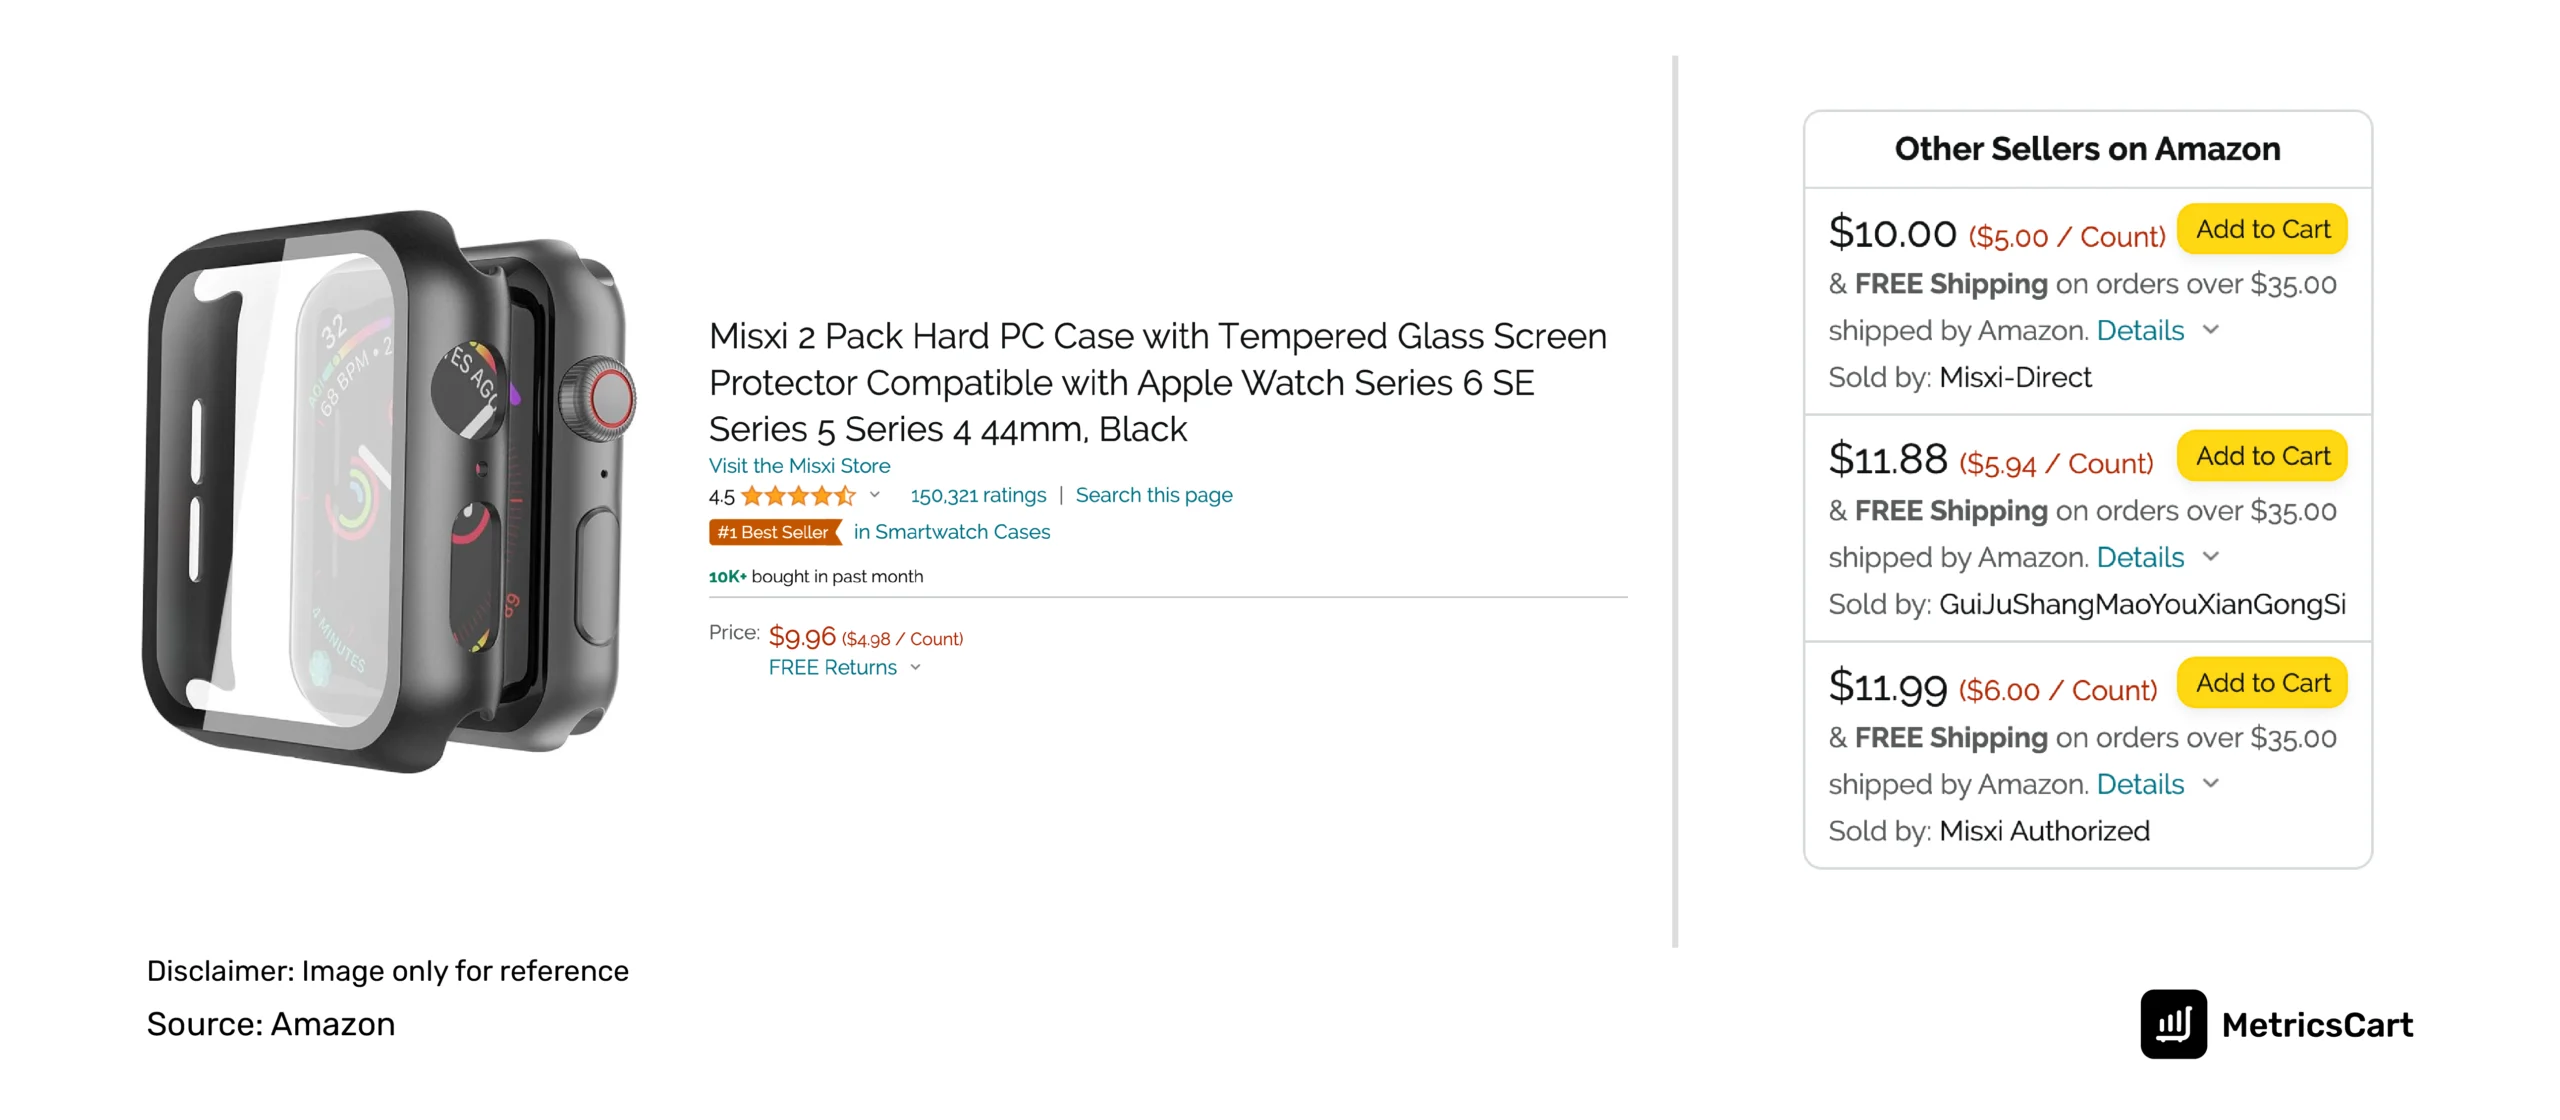 A screenshot of prices offered by different sellers for a tempered glass screen protector for Apple watch series 6 SE on Amazon marketplace.